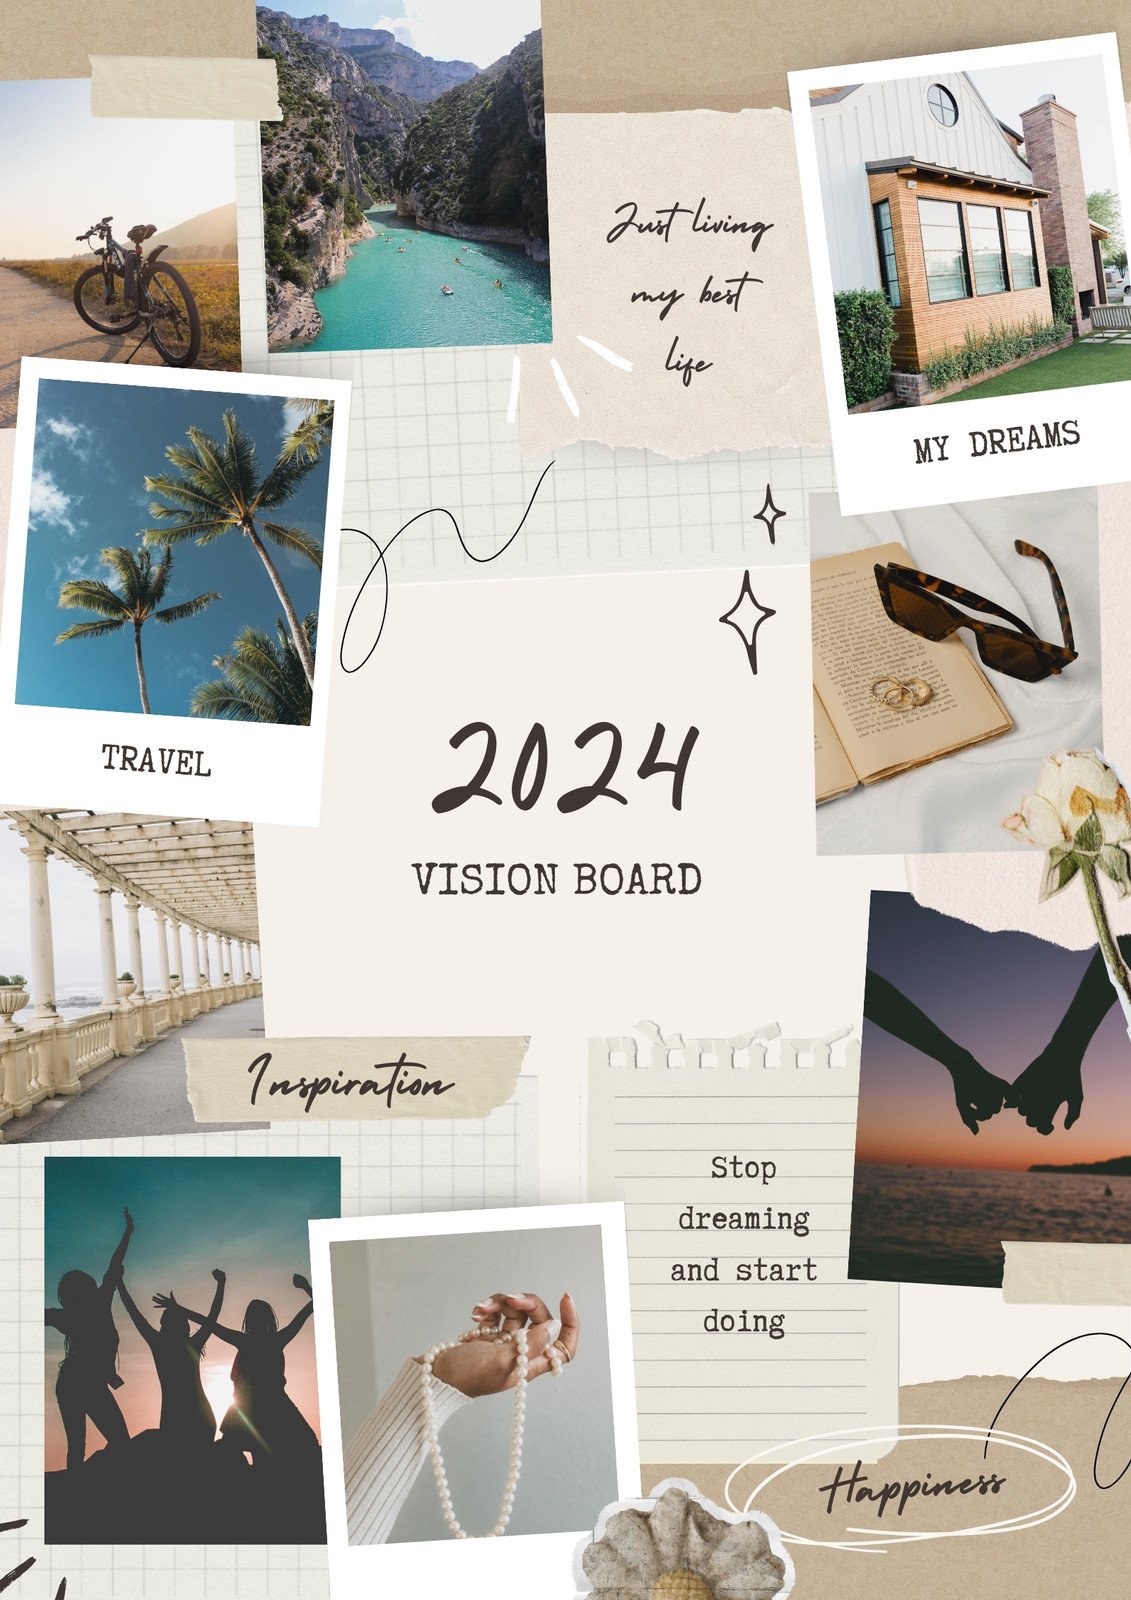 2022 Vision Board Clip Art For Men: A Vision Board Kit To Visualize Your  Dreams And Goals ( Pictures & Words )